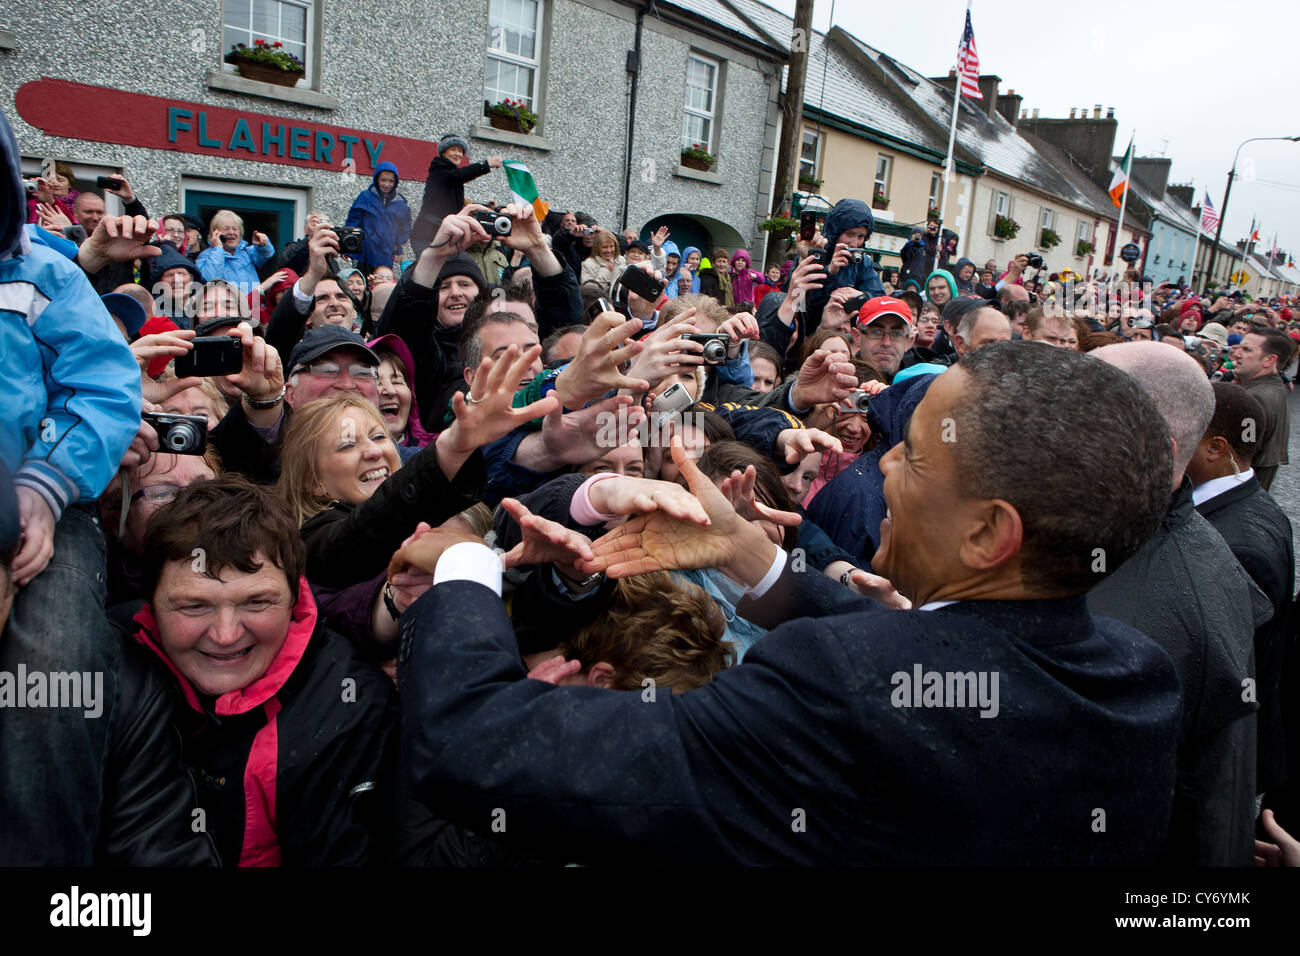 US President Barack Obama greets people on Main Street in Moneygall, Ireland, May 23, 2011. Stock Photo